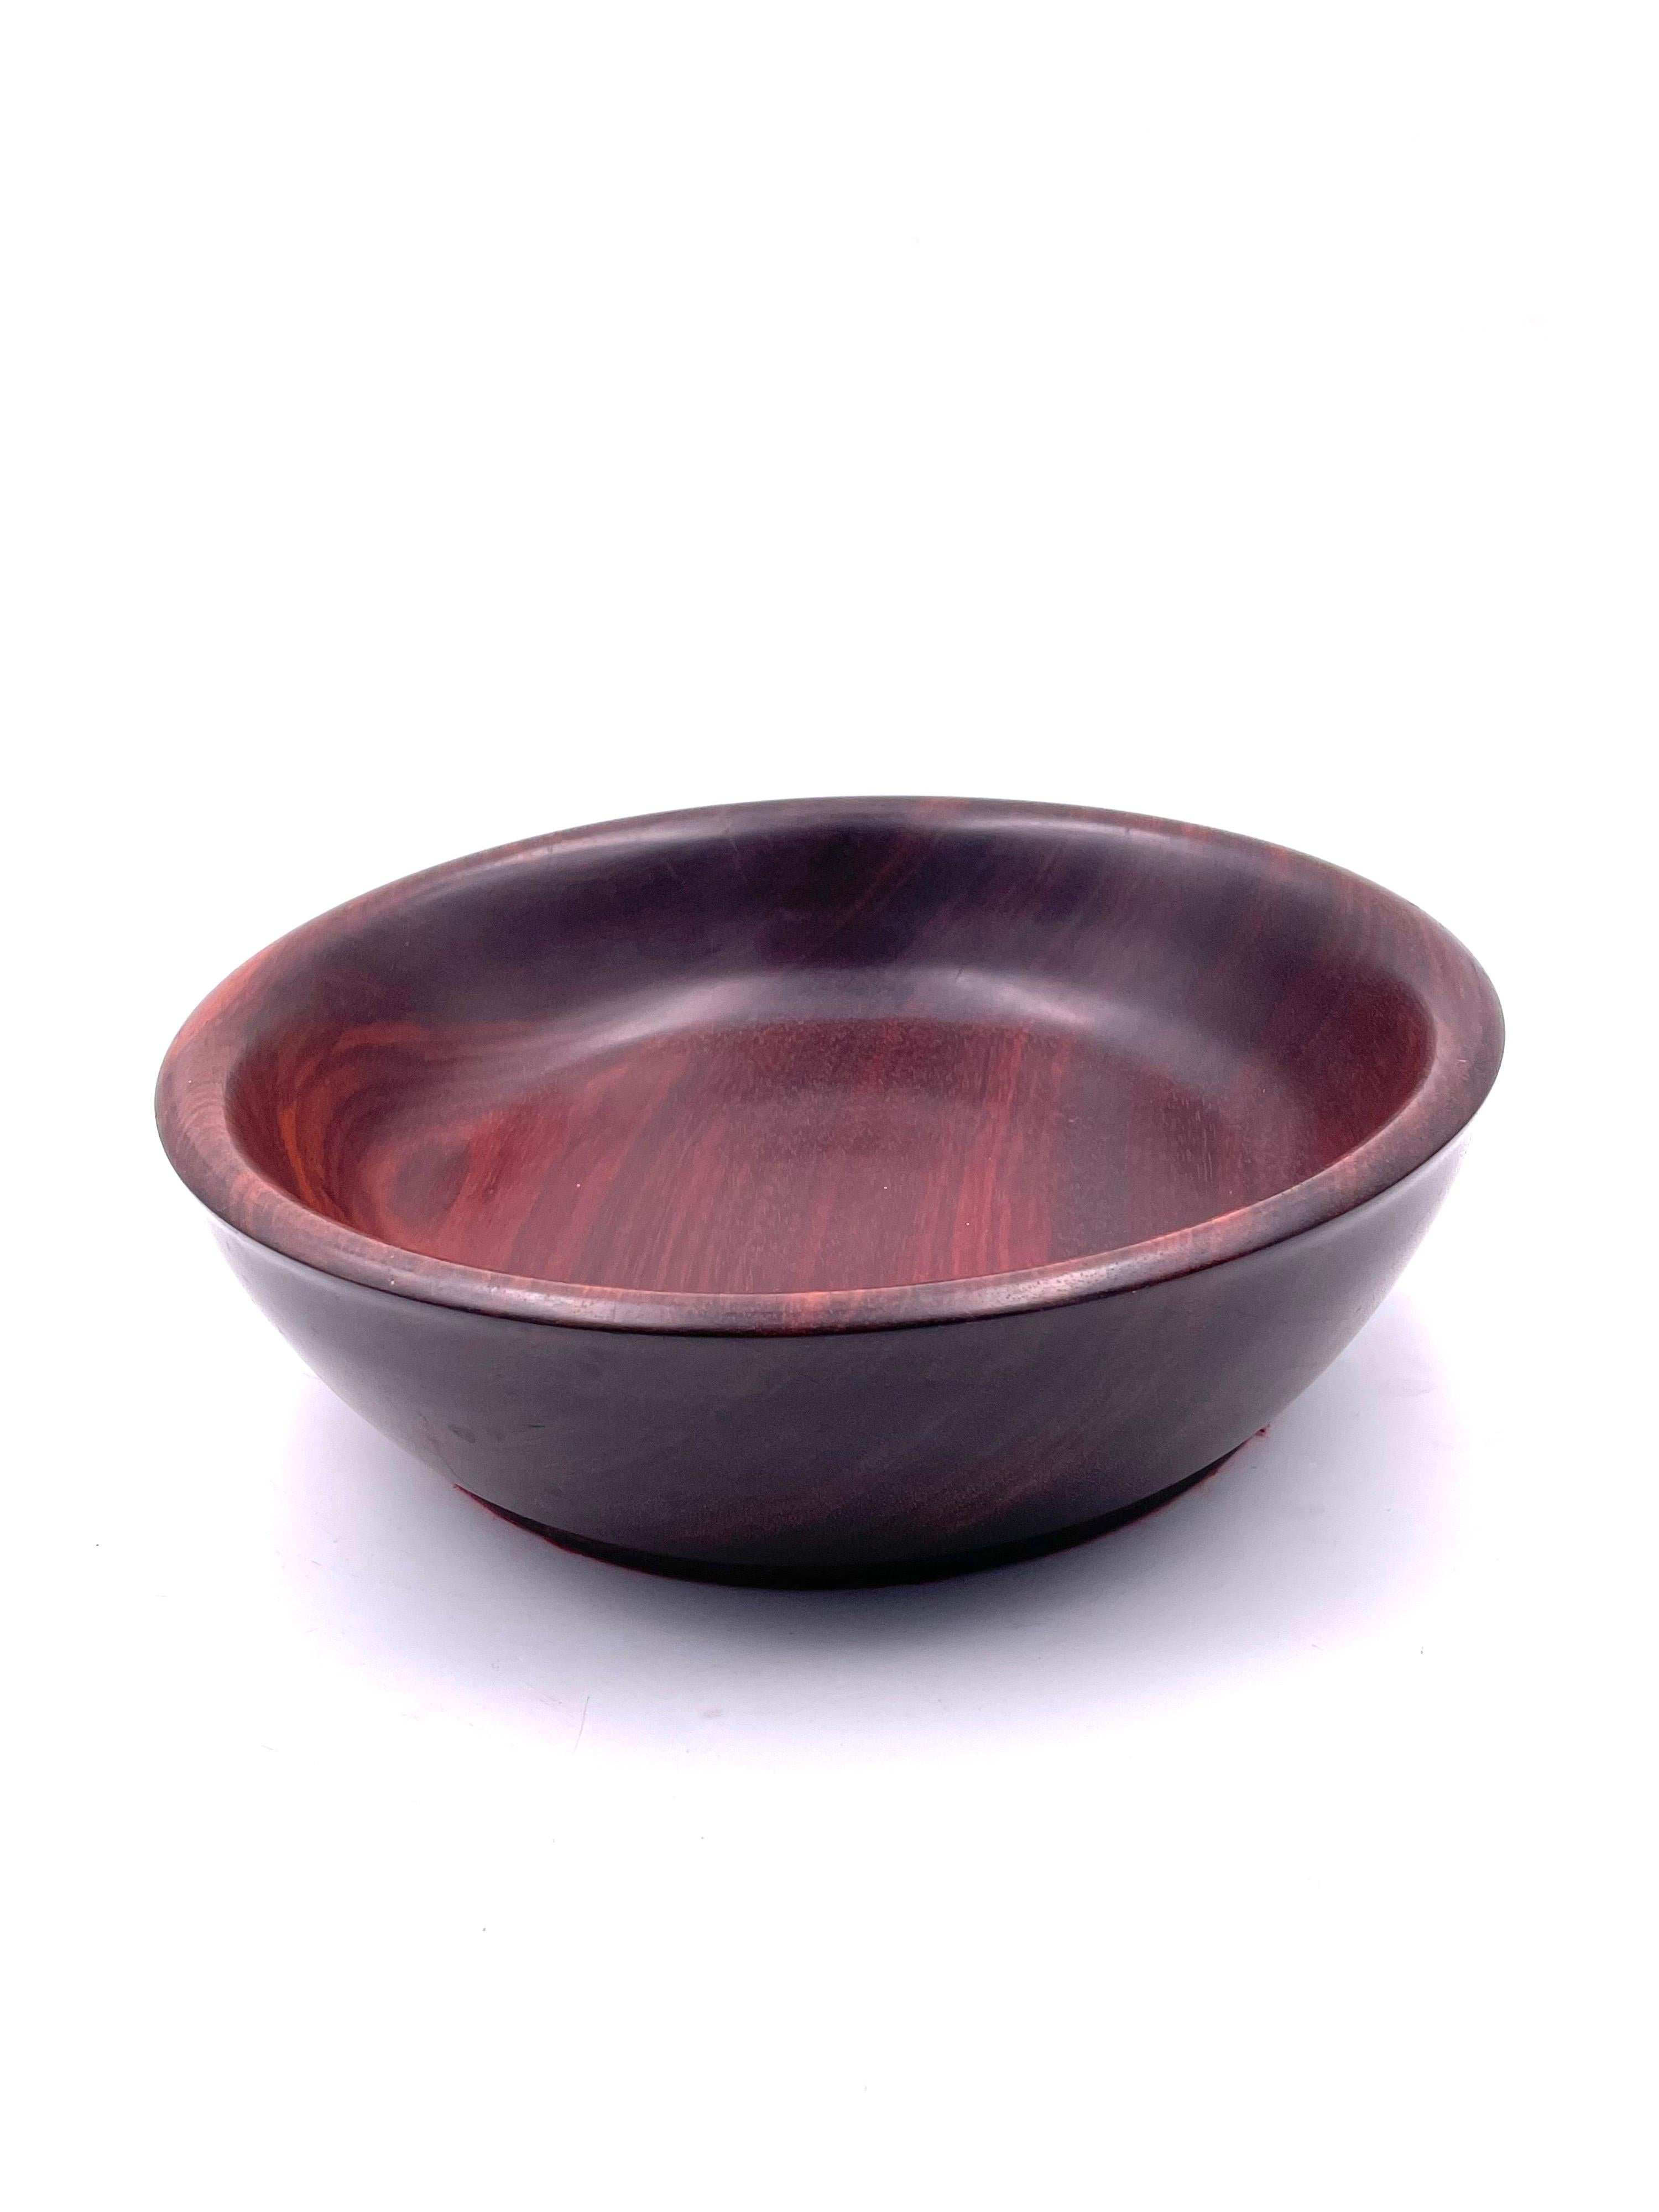 Solid Rosewood Mid-Century Modern Bowl In Excellent Condition For Sale In San Diego, CA